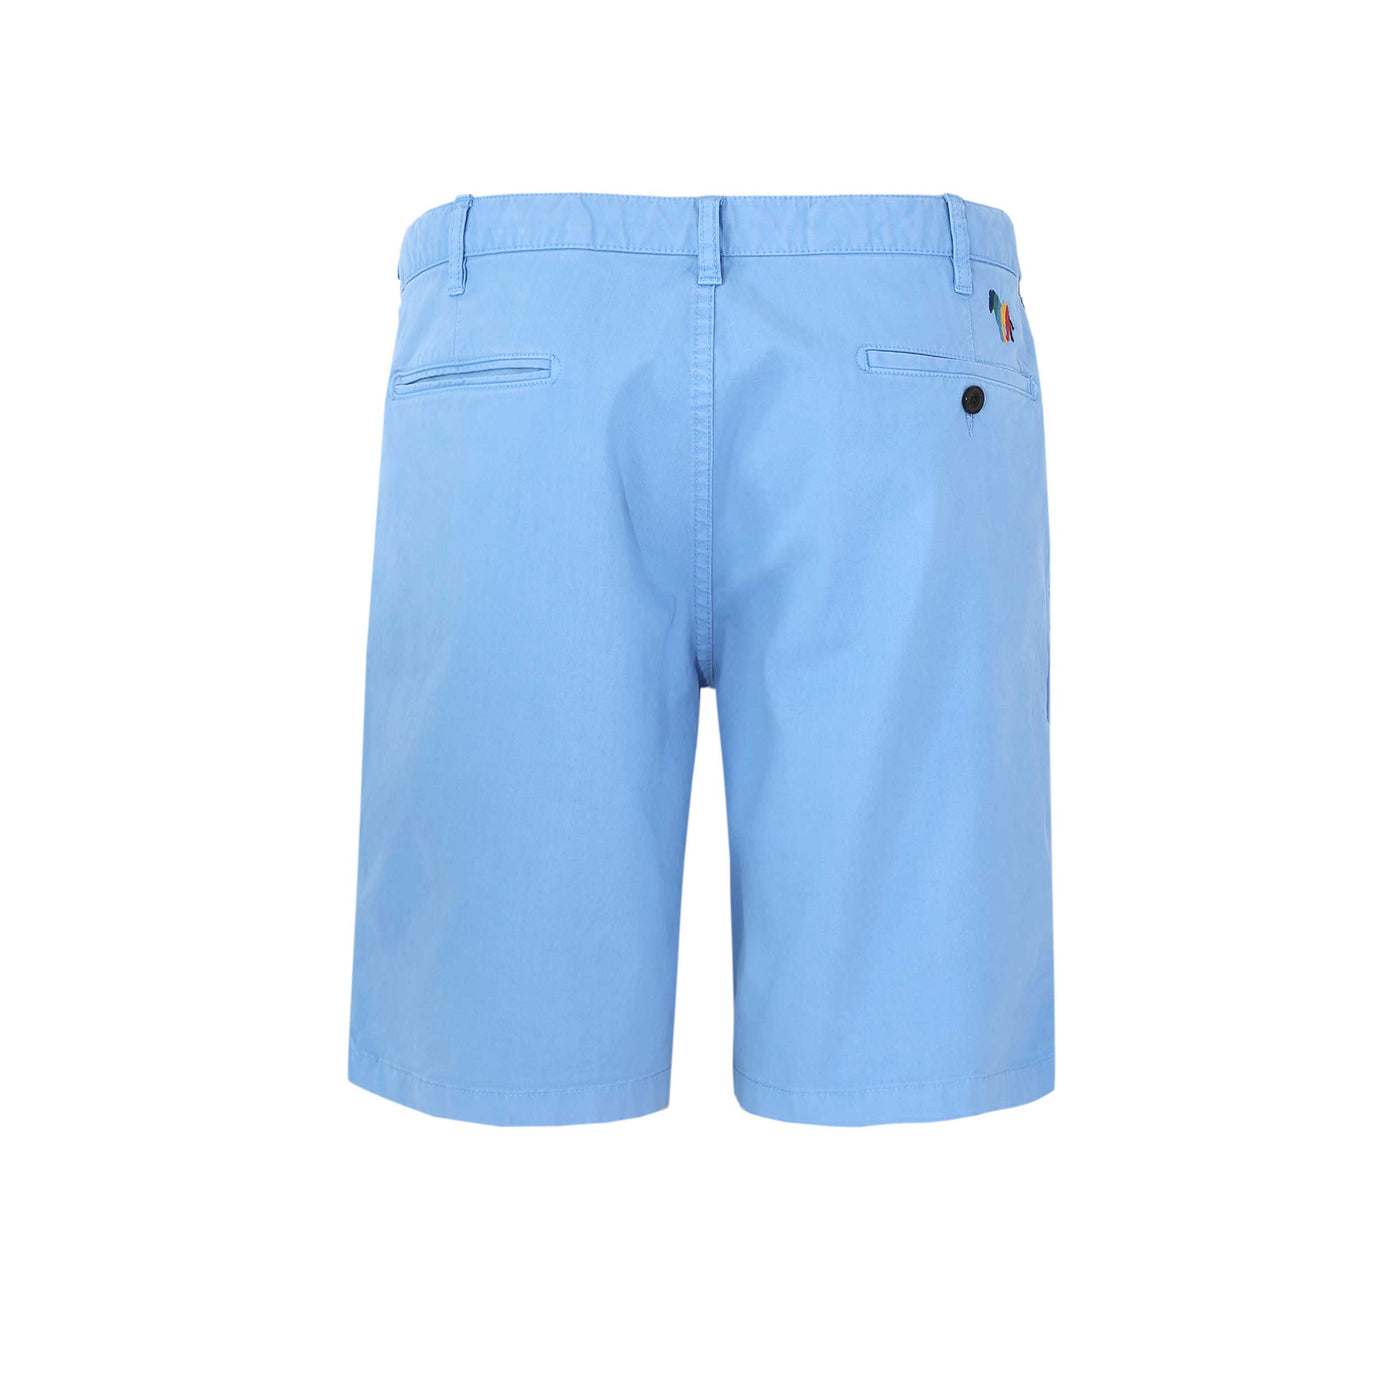 Paul Smith Casual Short in Sky Blue Back